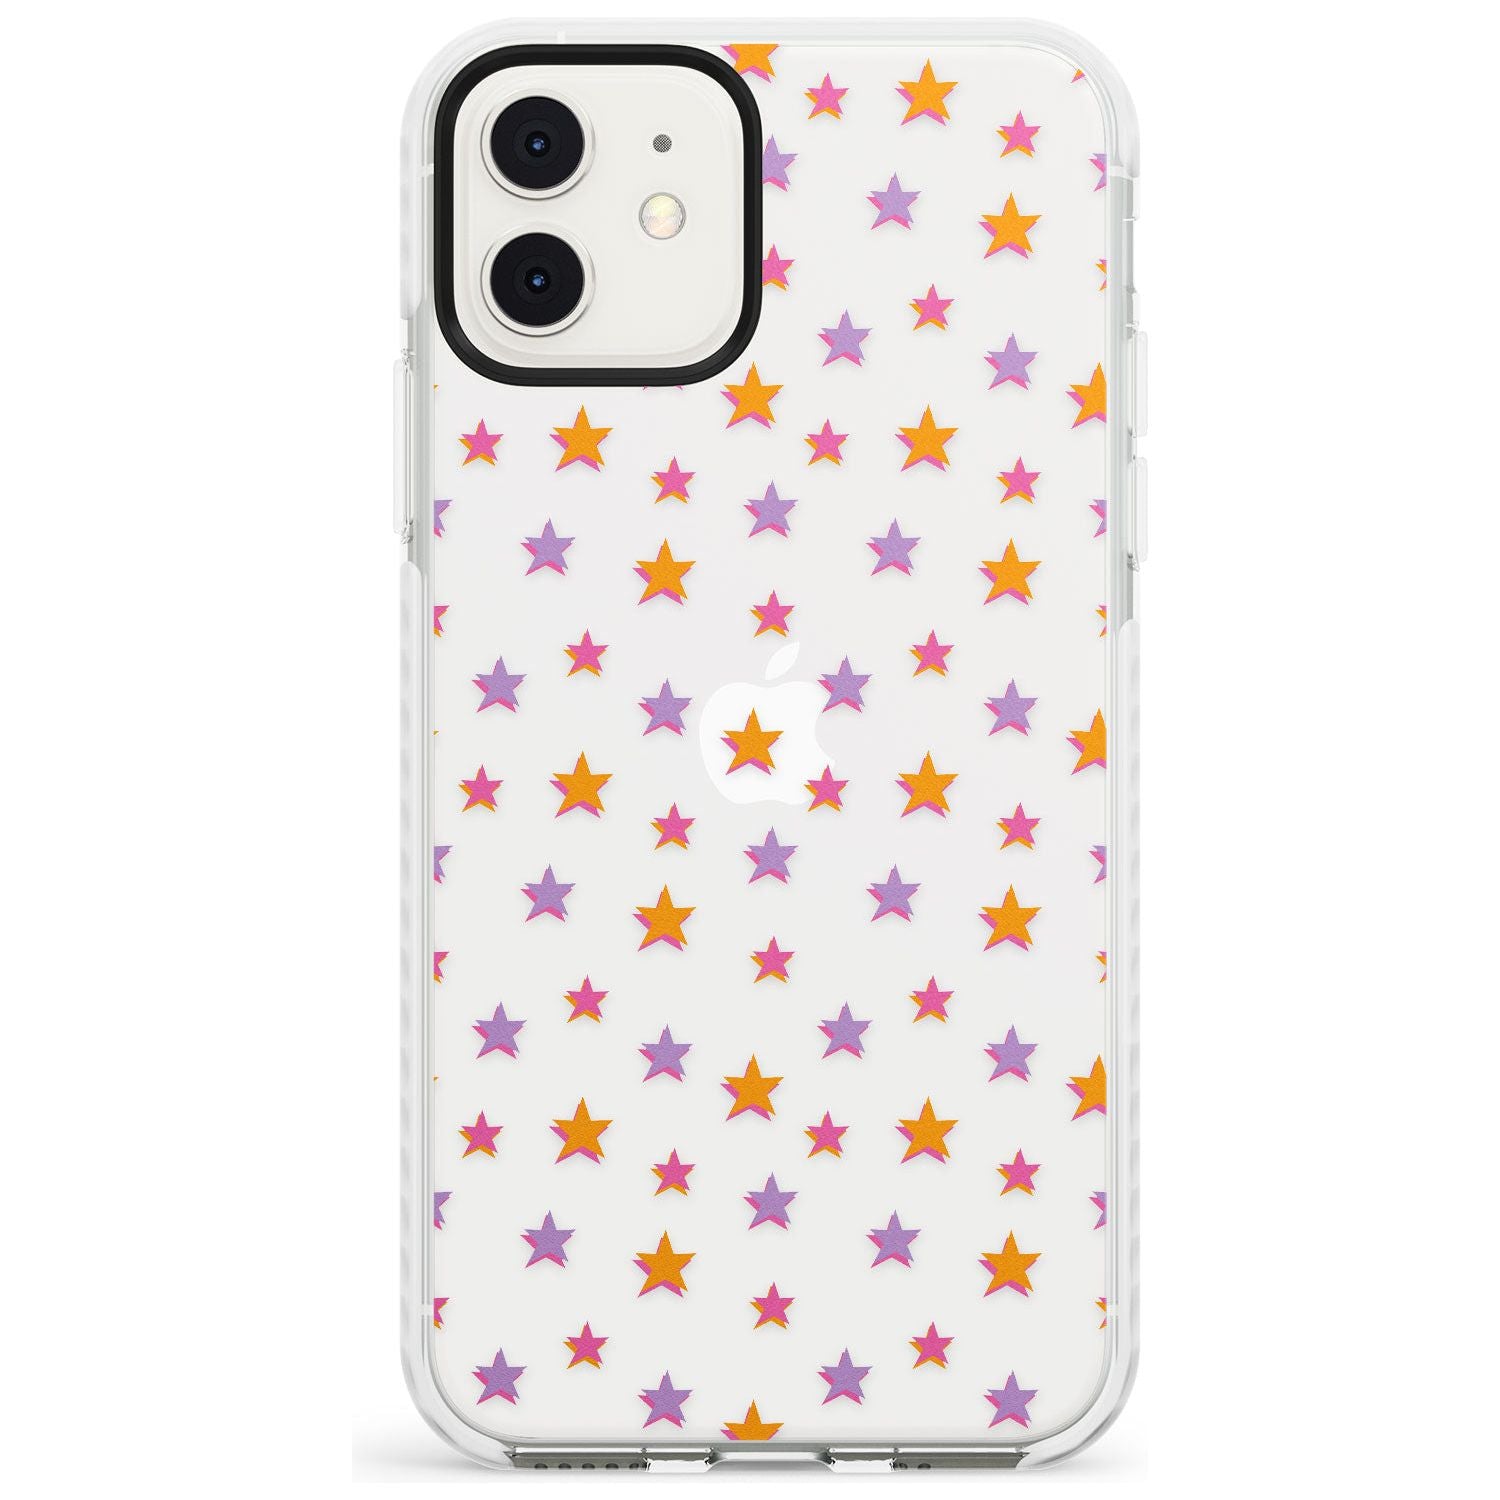 Spangling Stars Pattern Impact Phone Case for iPhone 11